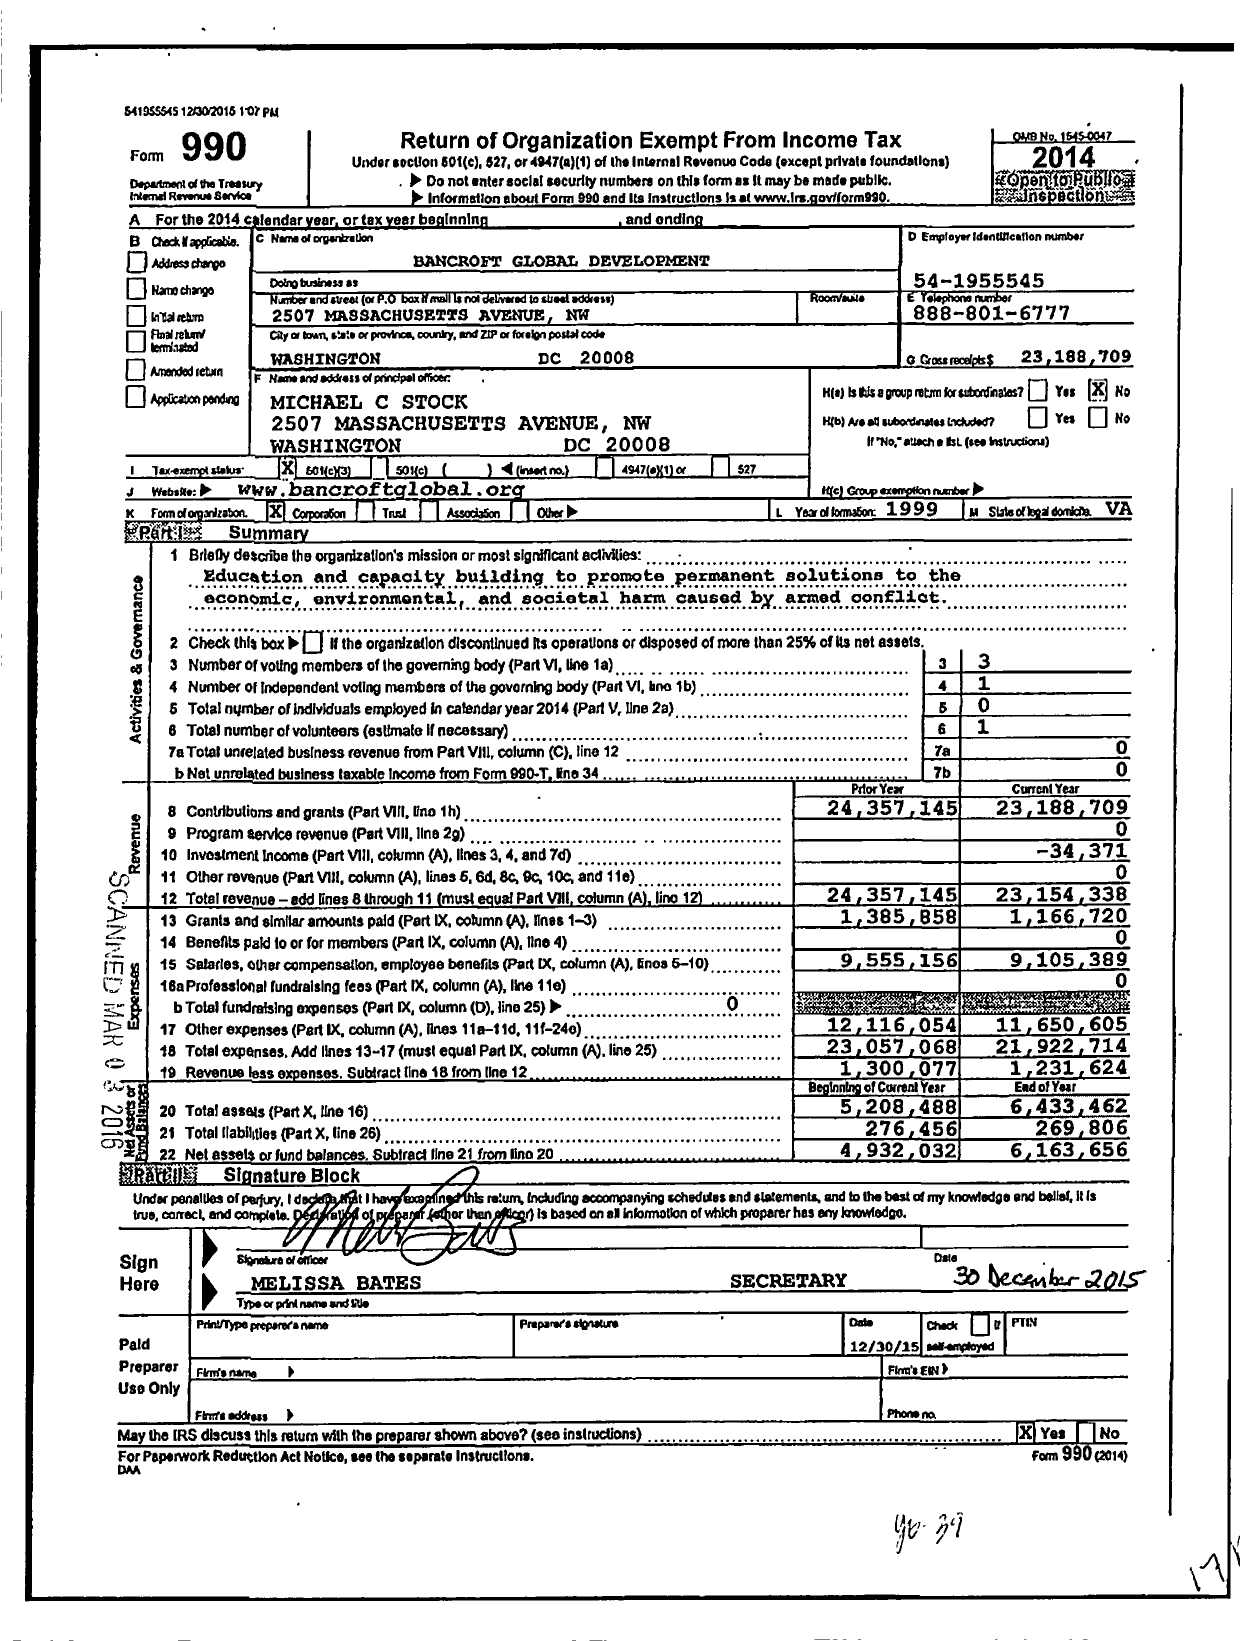 Image of first page of 2014 Form 990 for Bancroft Global Development